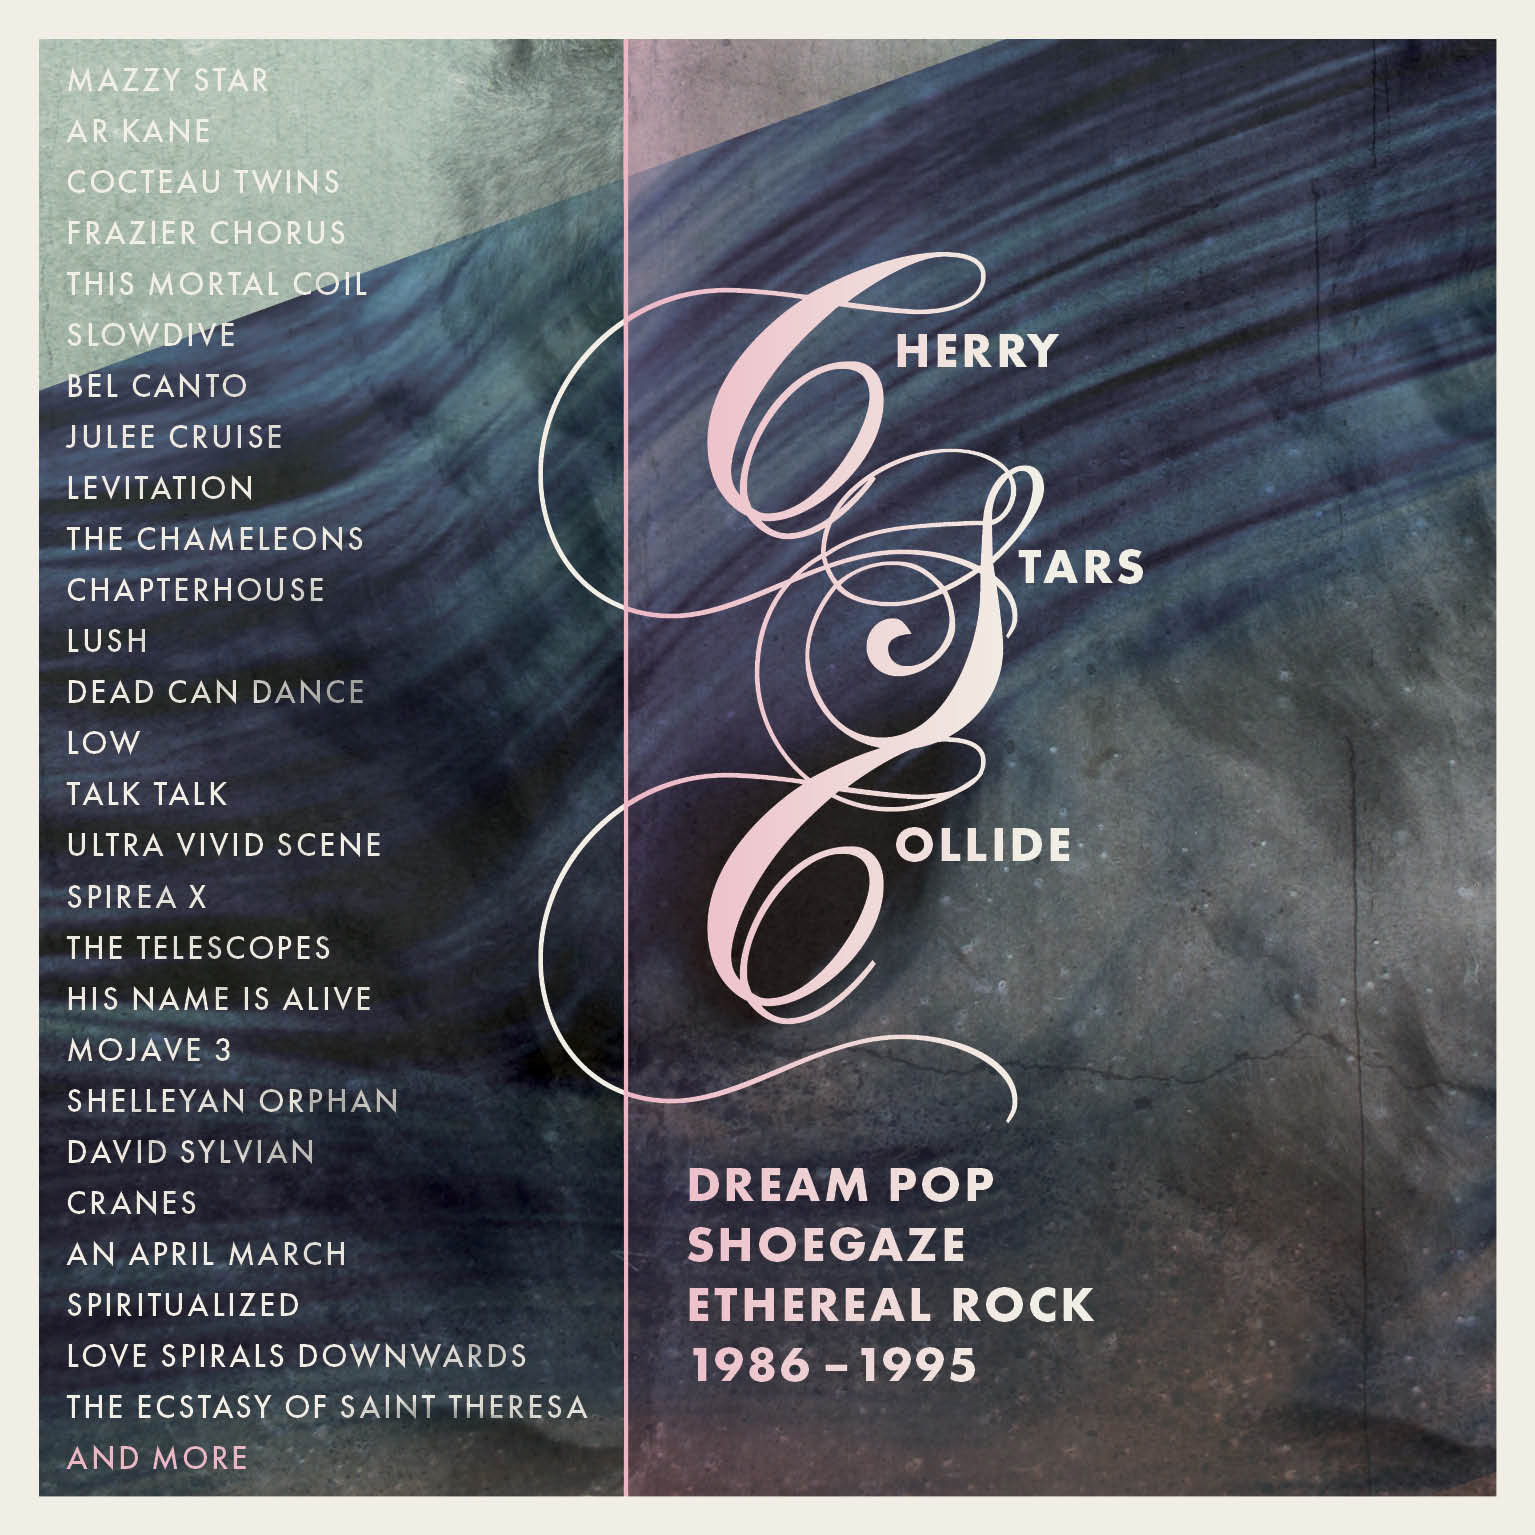 Various Artists - Cherry Stars Collide – Dream Pop, Shoegaze & Ethereal Rock 1986-1995 (Cherry Red)